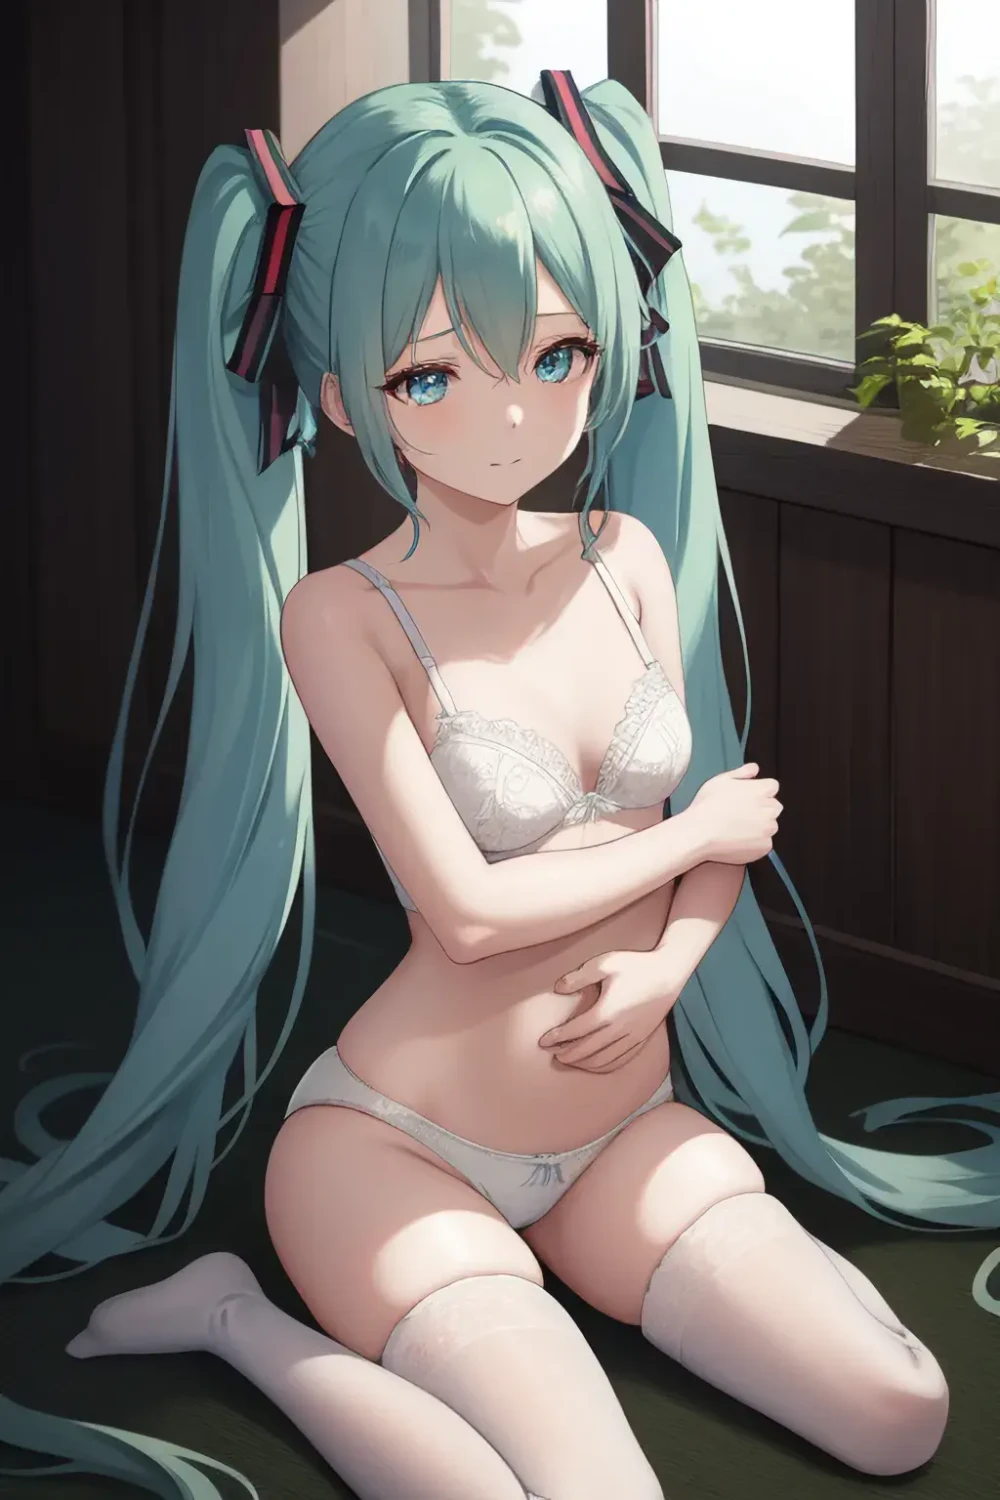 hatsune-miku-anime-style-all-ages-10